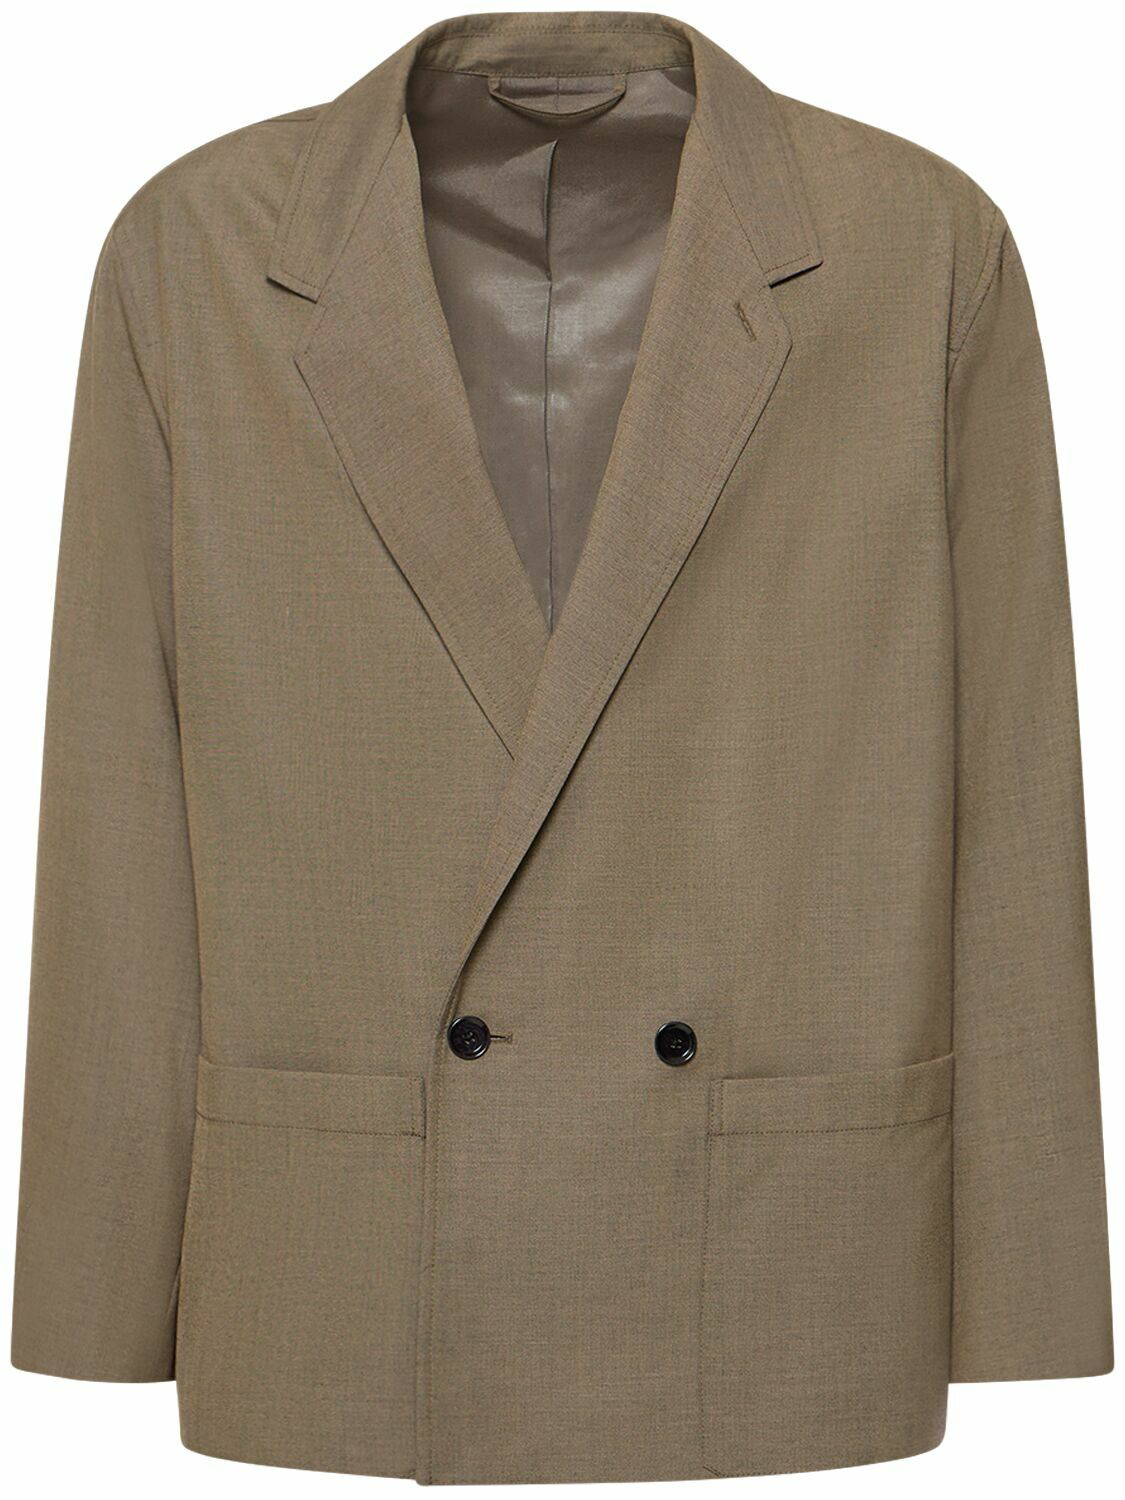 LEMAIRE - Double Breasted Wool Blend Jacket Lemaire